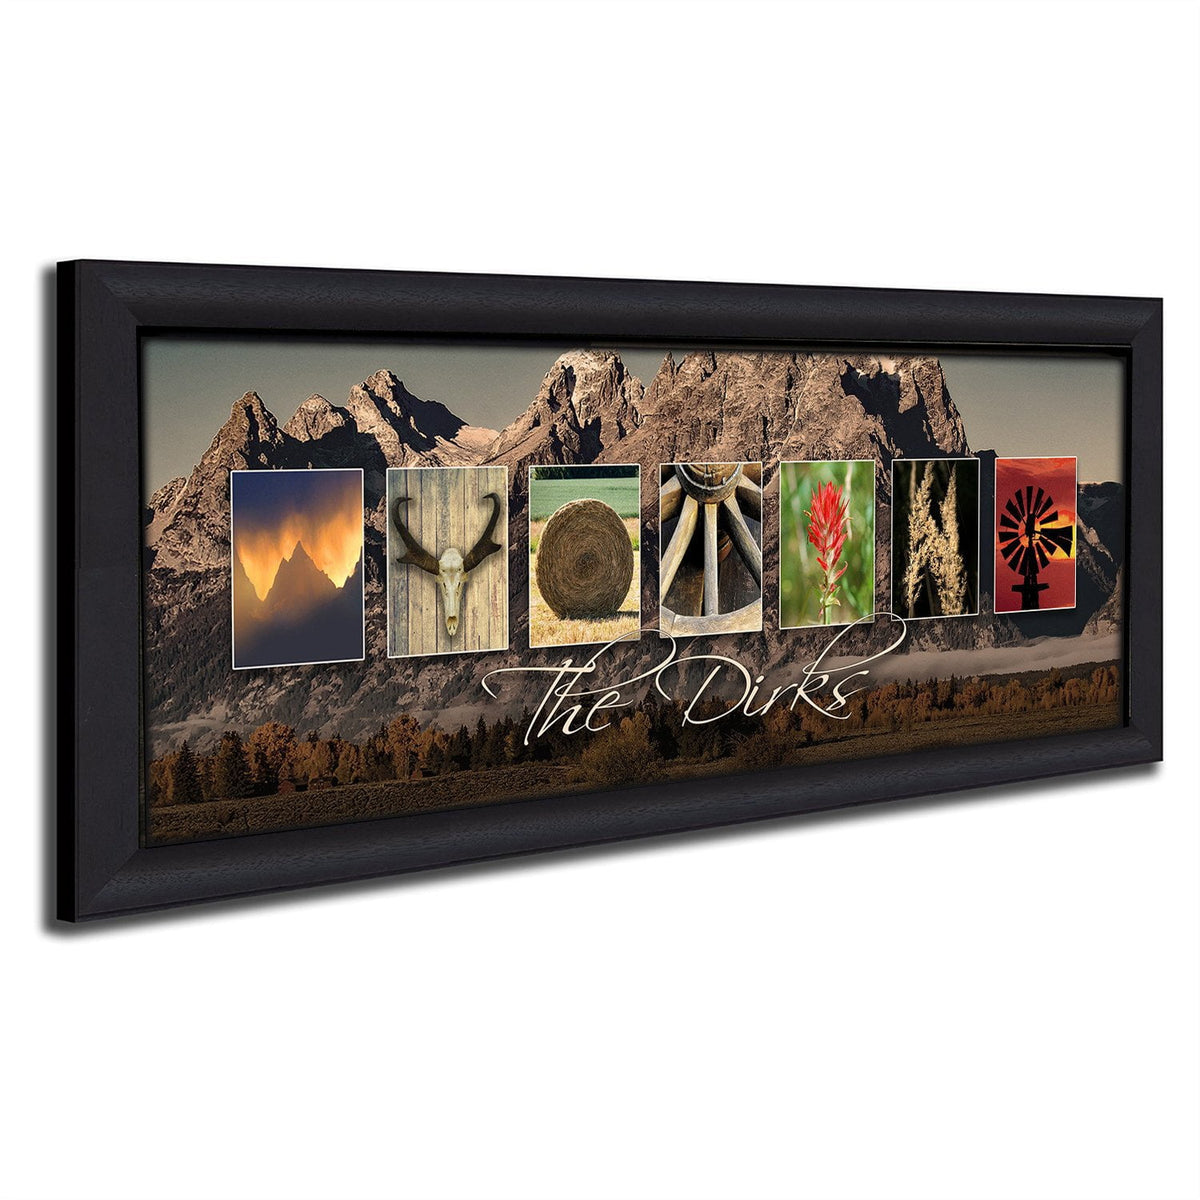 State Pride Art of Wyoming gift Personalized With Your Name- Framed Canvas